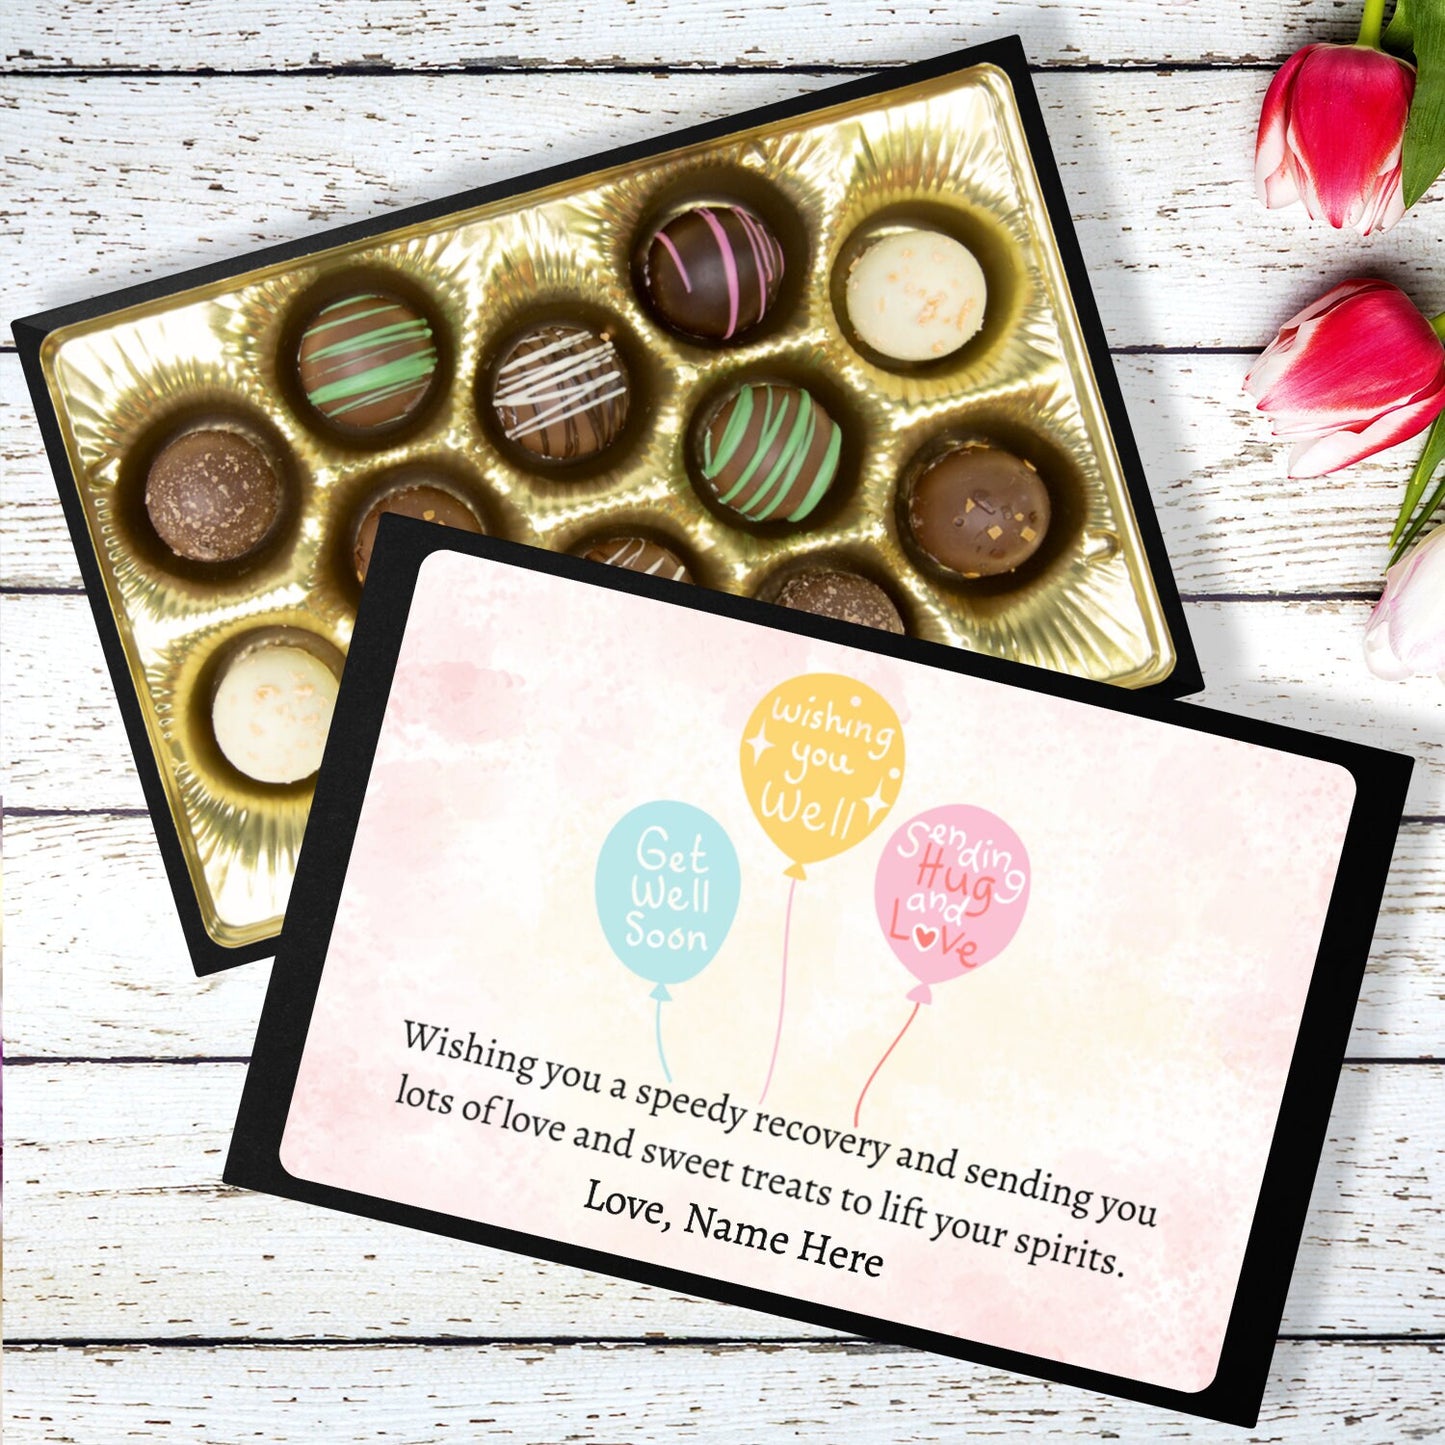 Get Well Soon Gift, Thinking of You, Care Package, Chocolate Box, Chocolate Truffles Gift,Recovery Gift, Surgery Gift